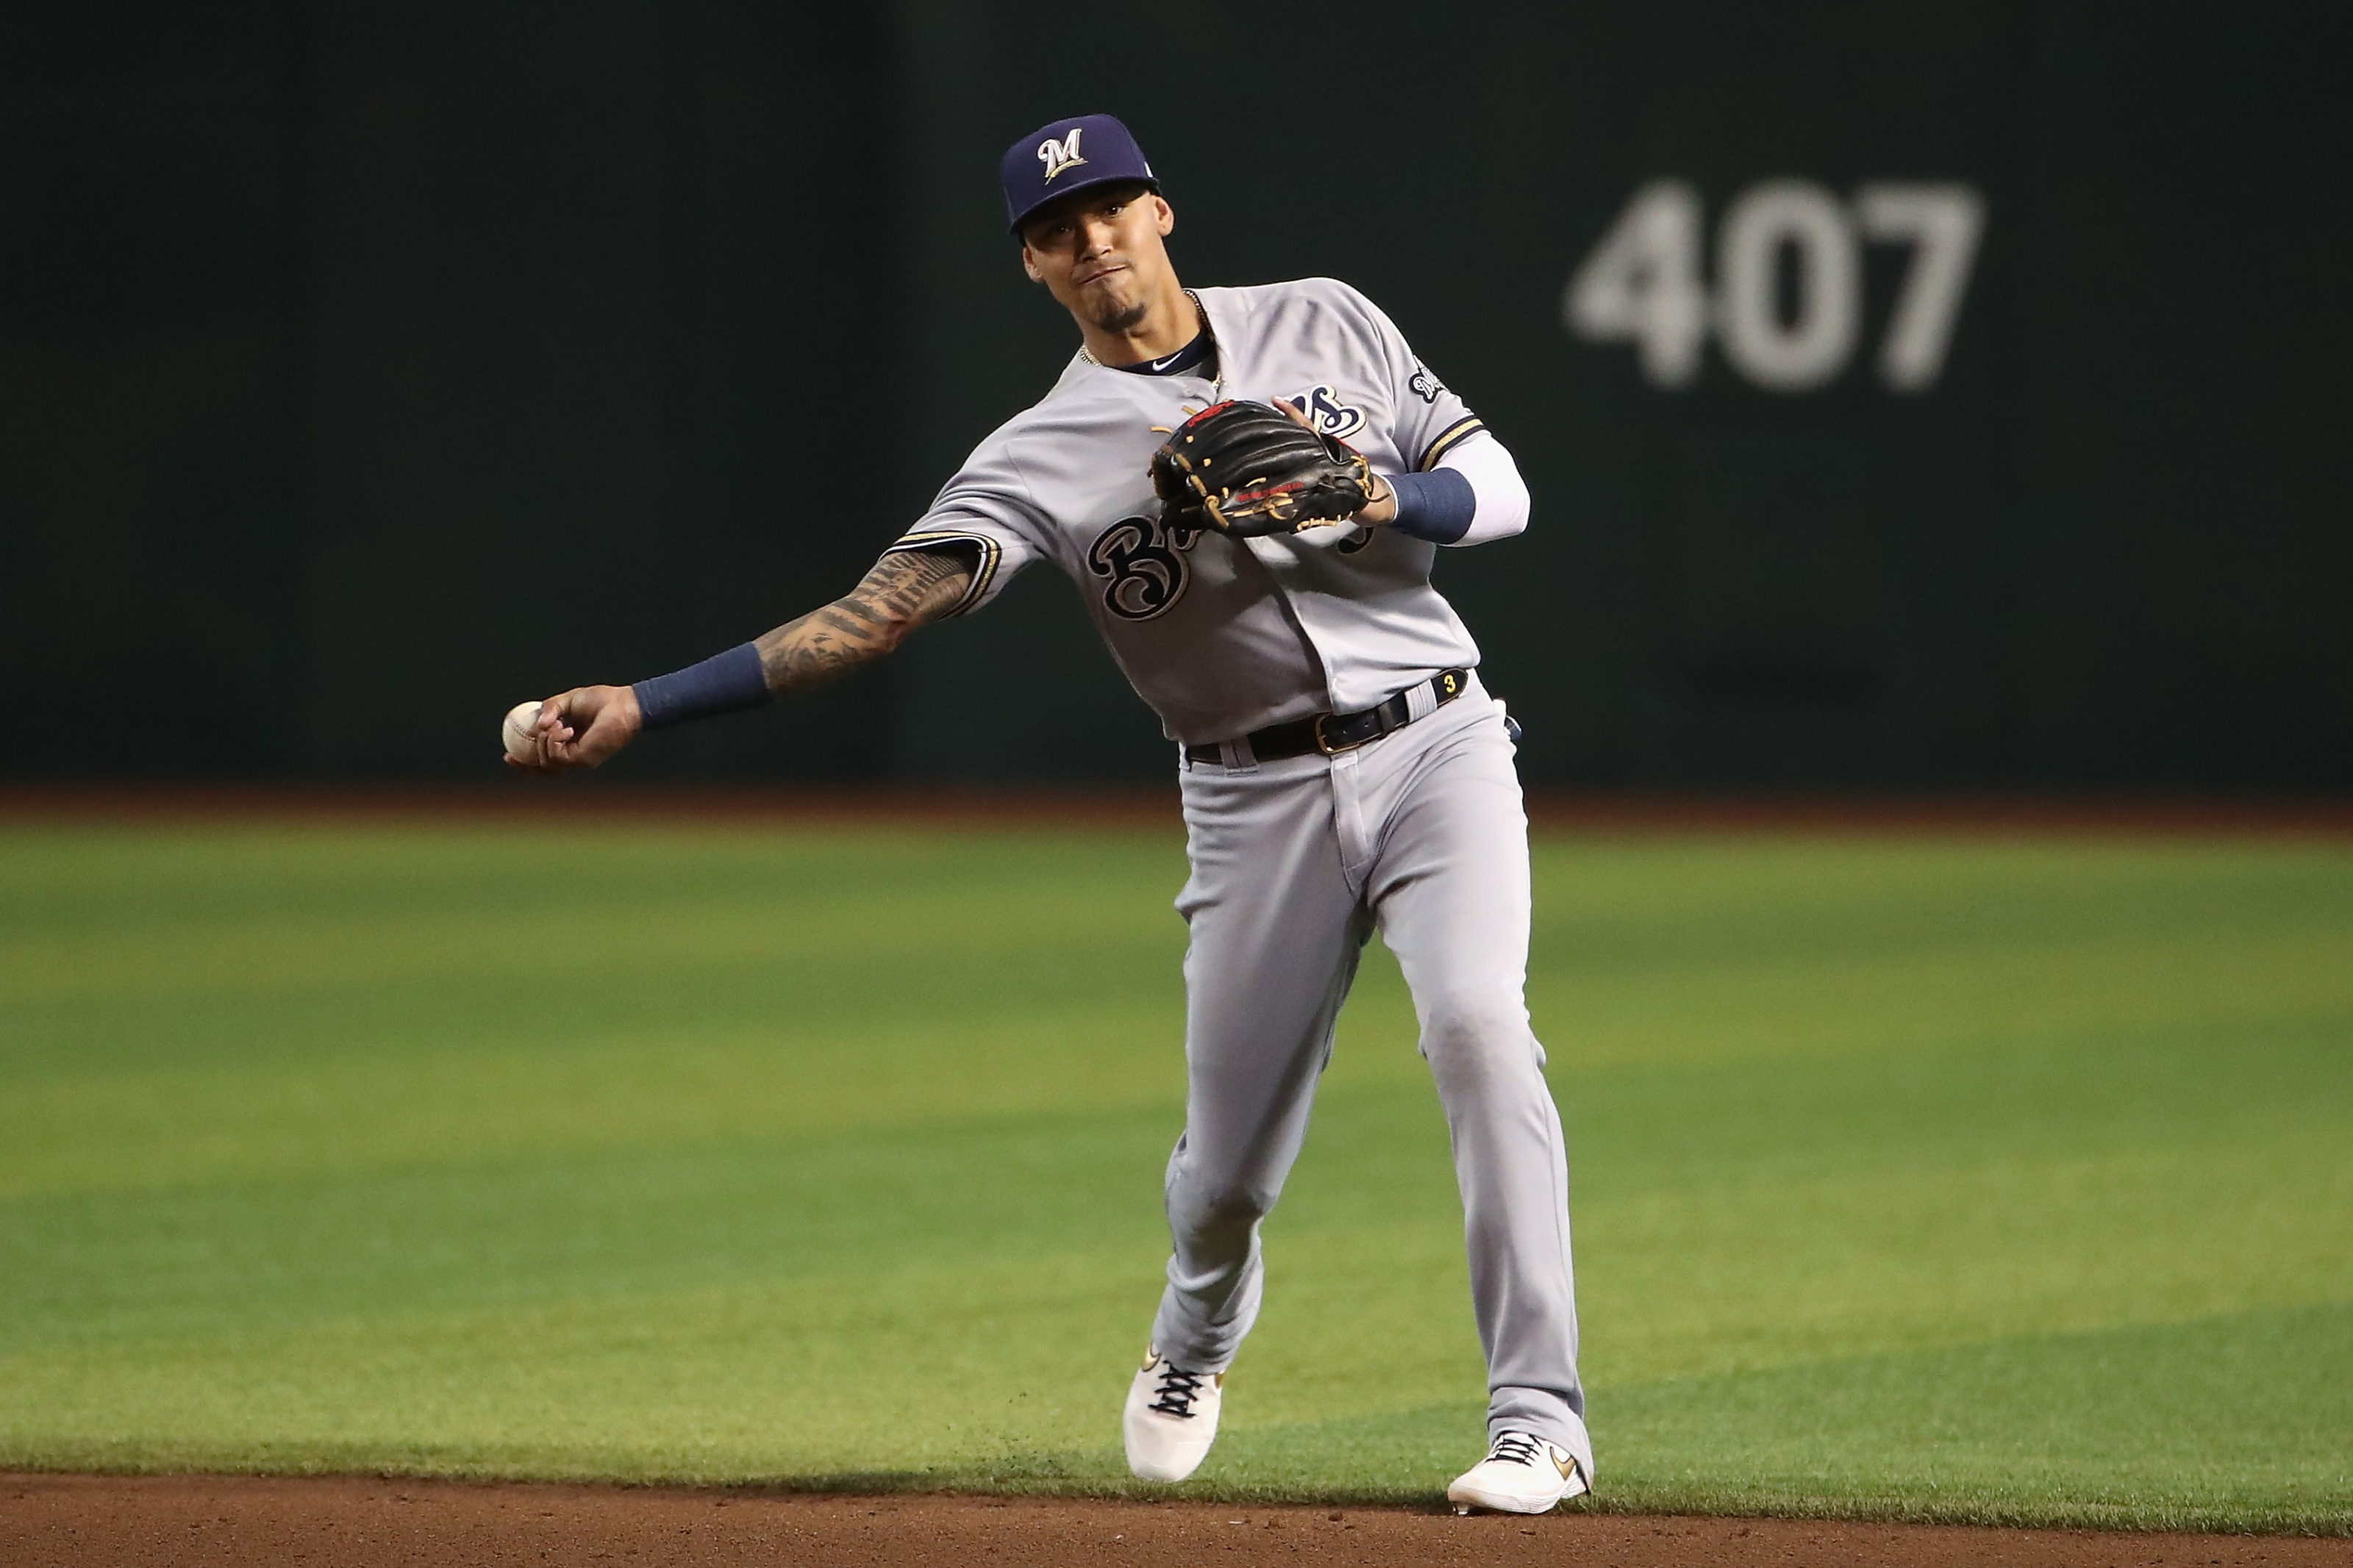 Orlando Arcia will play key role for Brewers offensively